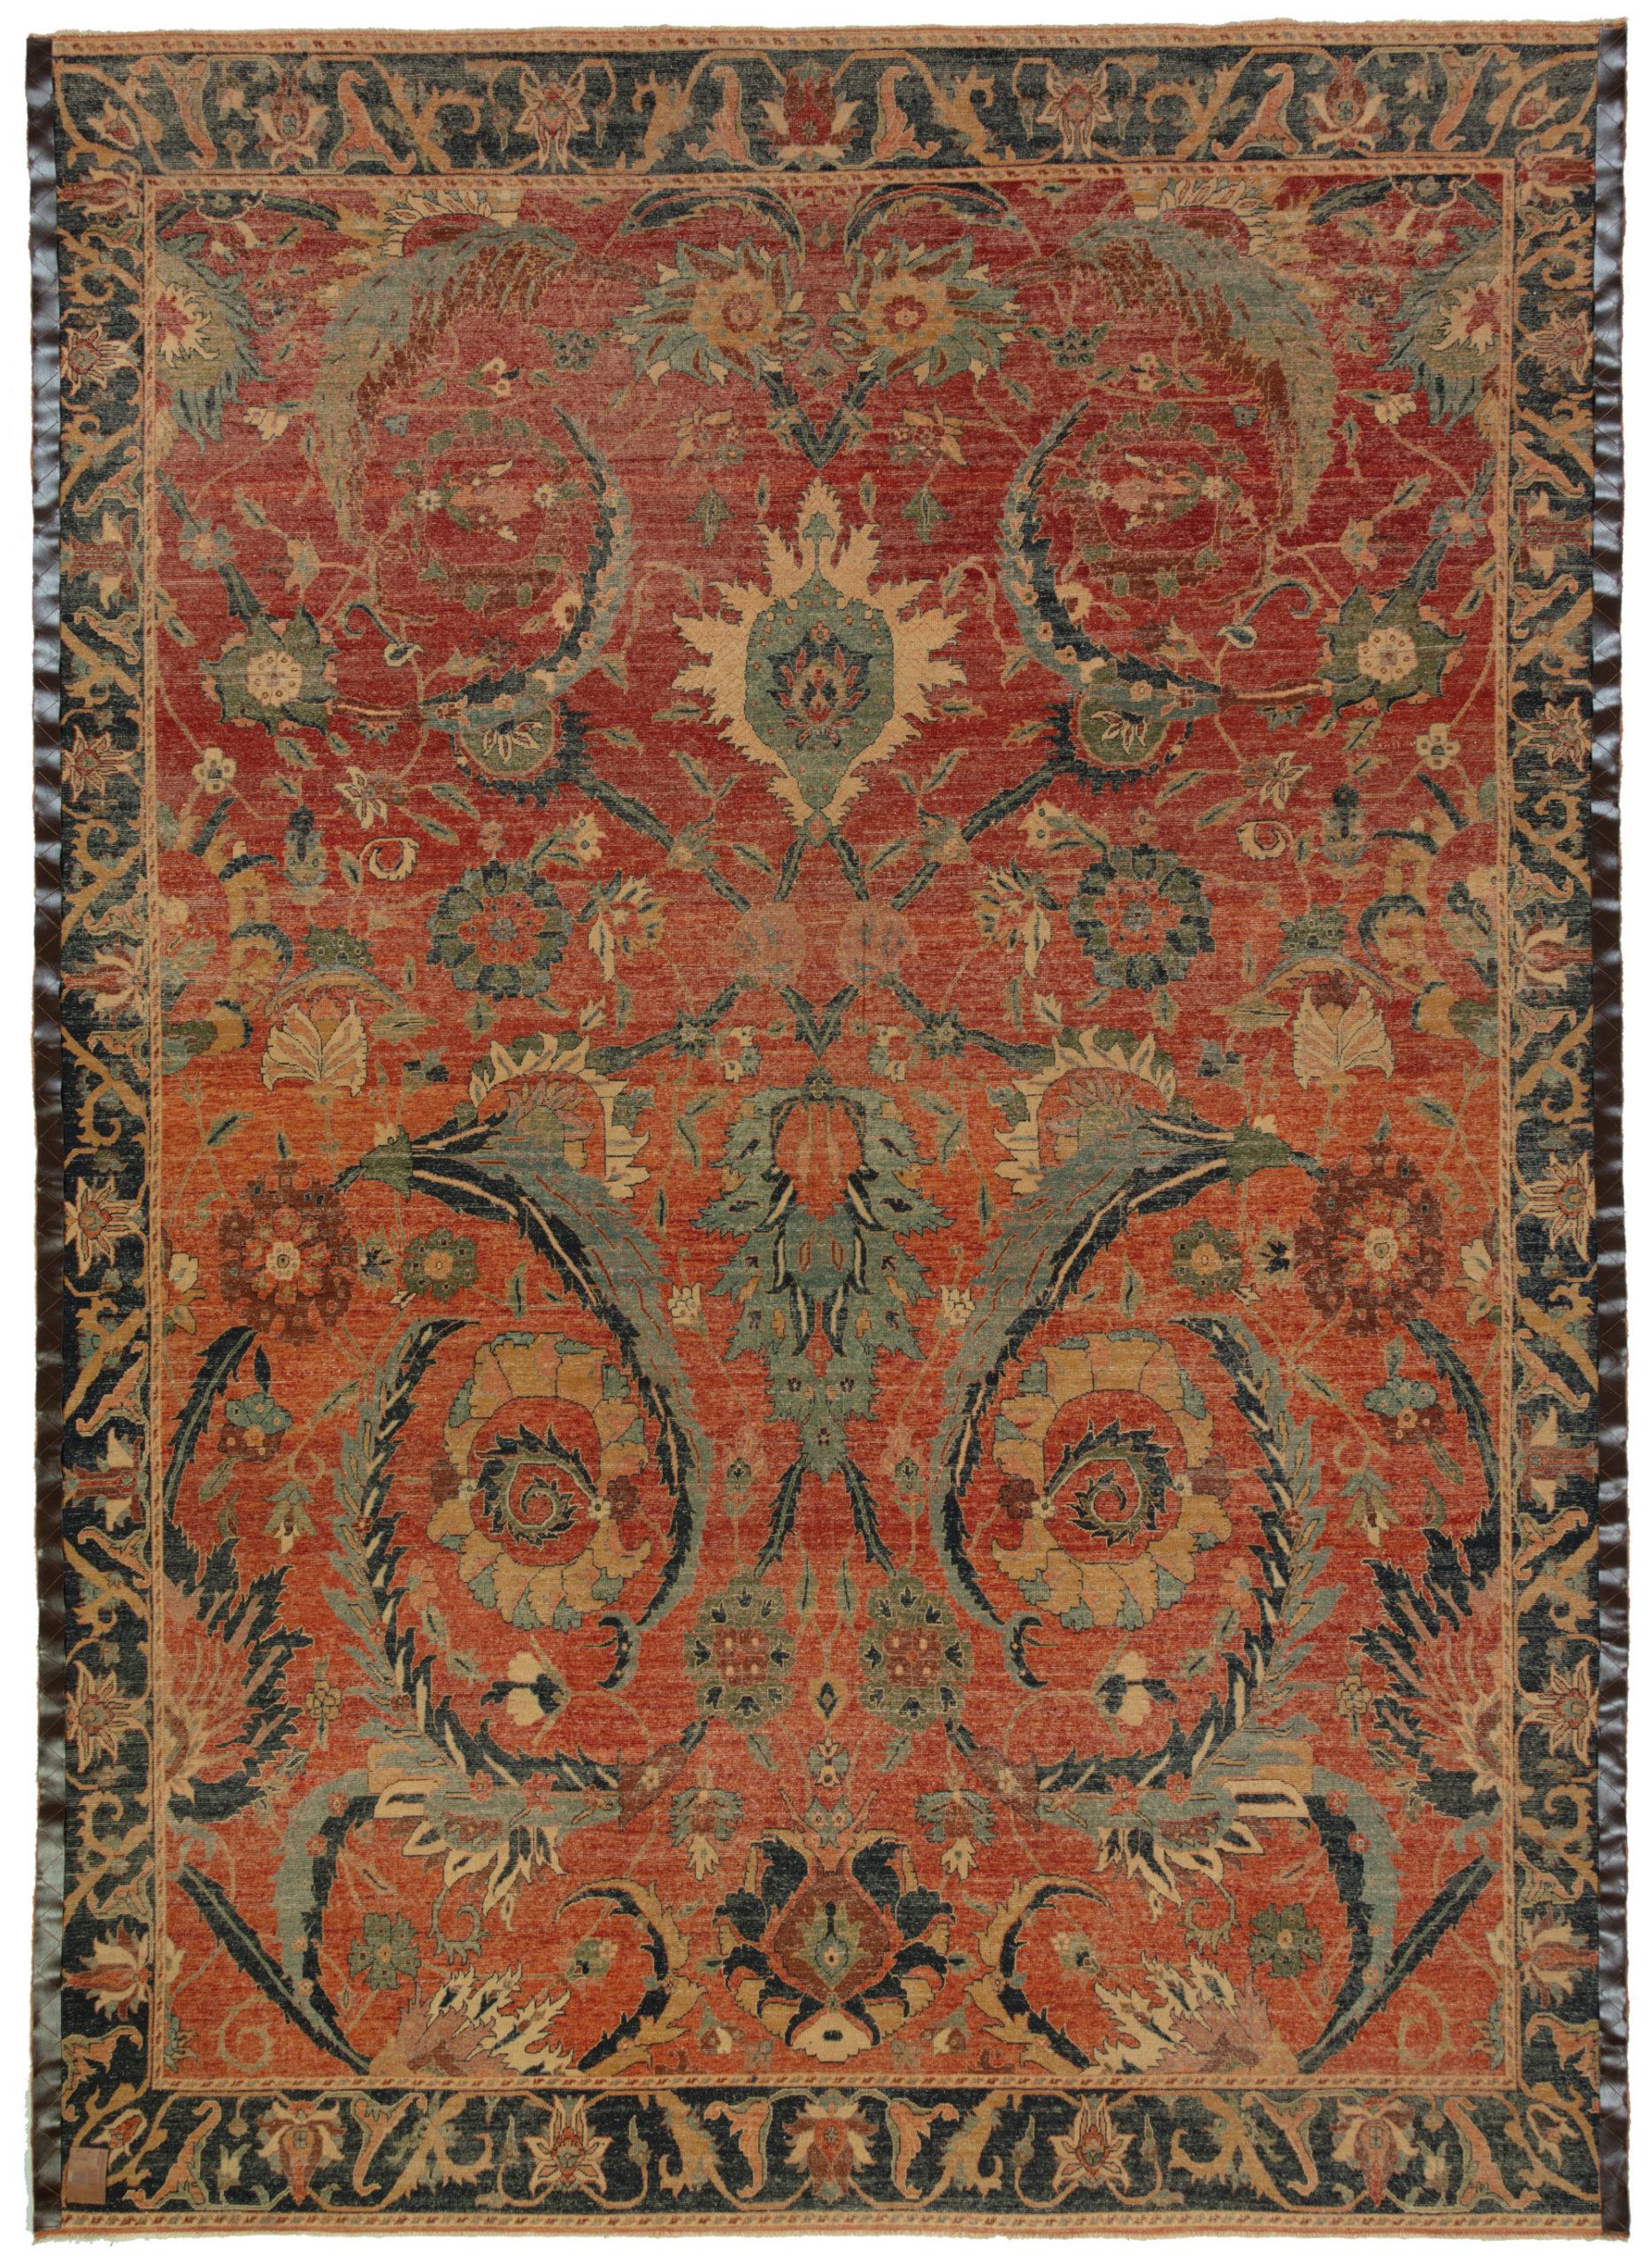 The design source of the carpet comes from the book Museo Calouste Gulbenkian, Printed by Gulbenkian Museum Lisbon, in 2015, nr.52. This is a vase-technique carpet design in the 17th century in the Kerman region, of Persia. In the 16th century, in